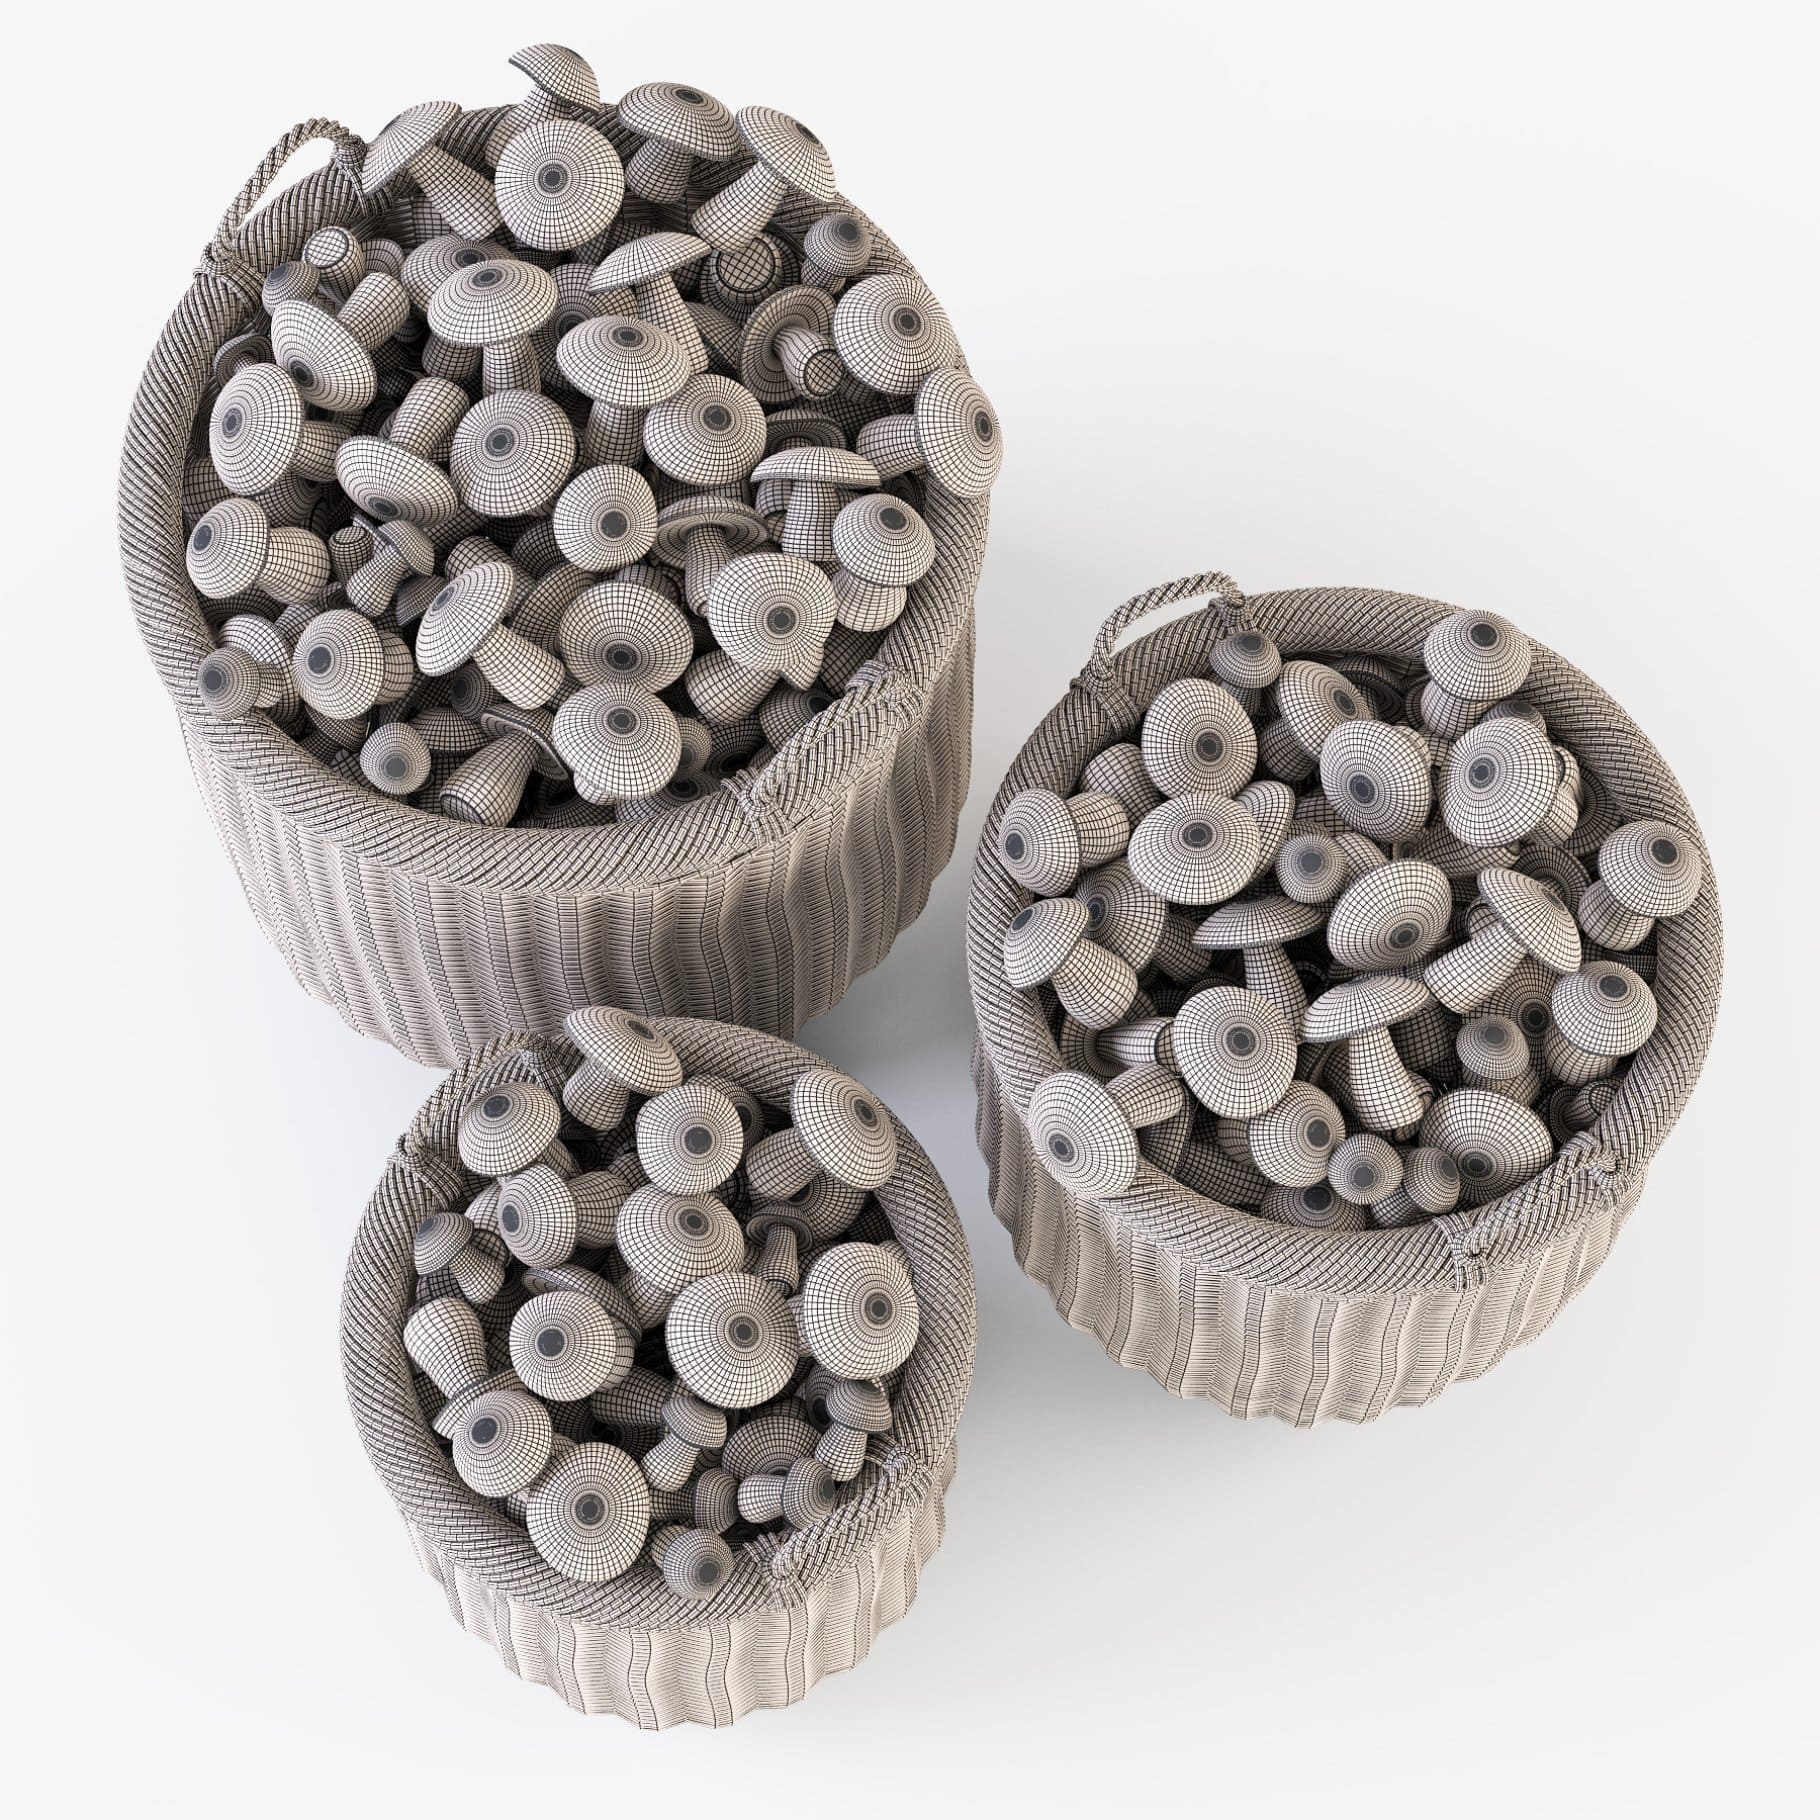 3D models of wicker baskets with mushrooms in black and white colors.